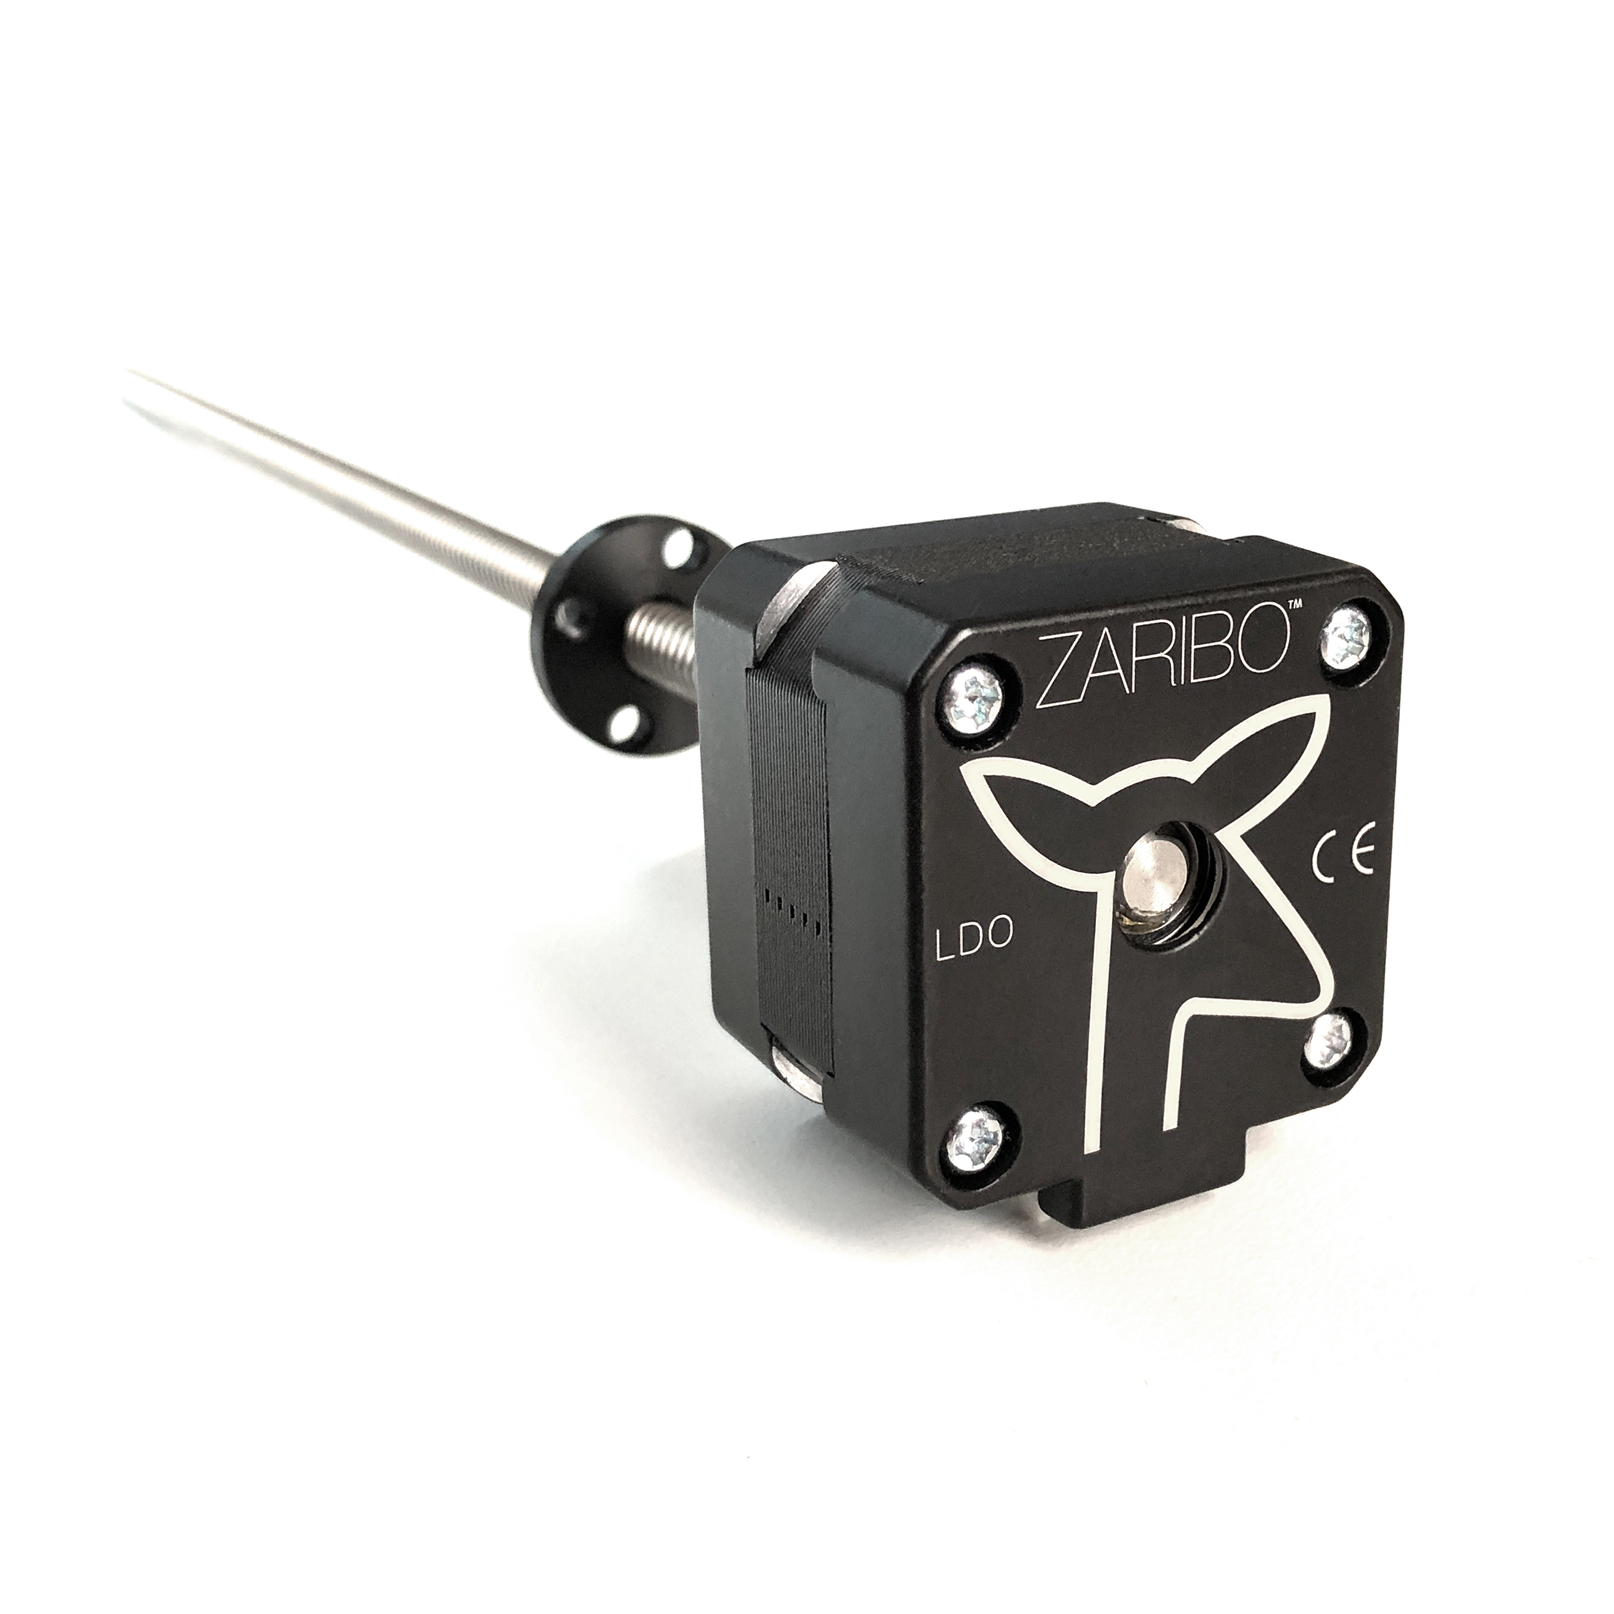 ZARIBO Nema 17 High-Quality and Silent Stepper Motor With Detachable Cable 